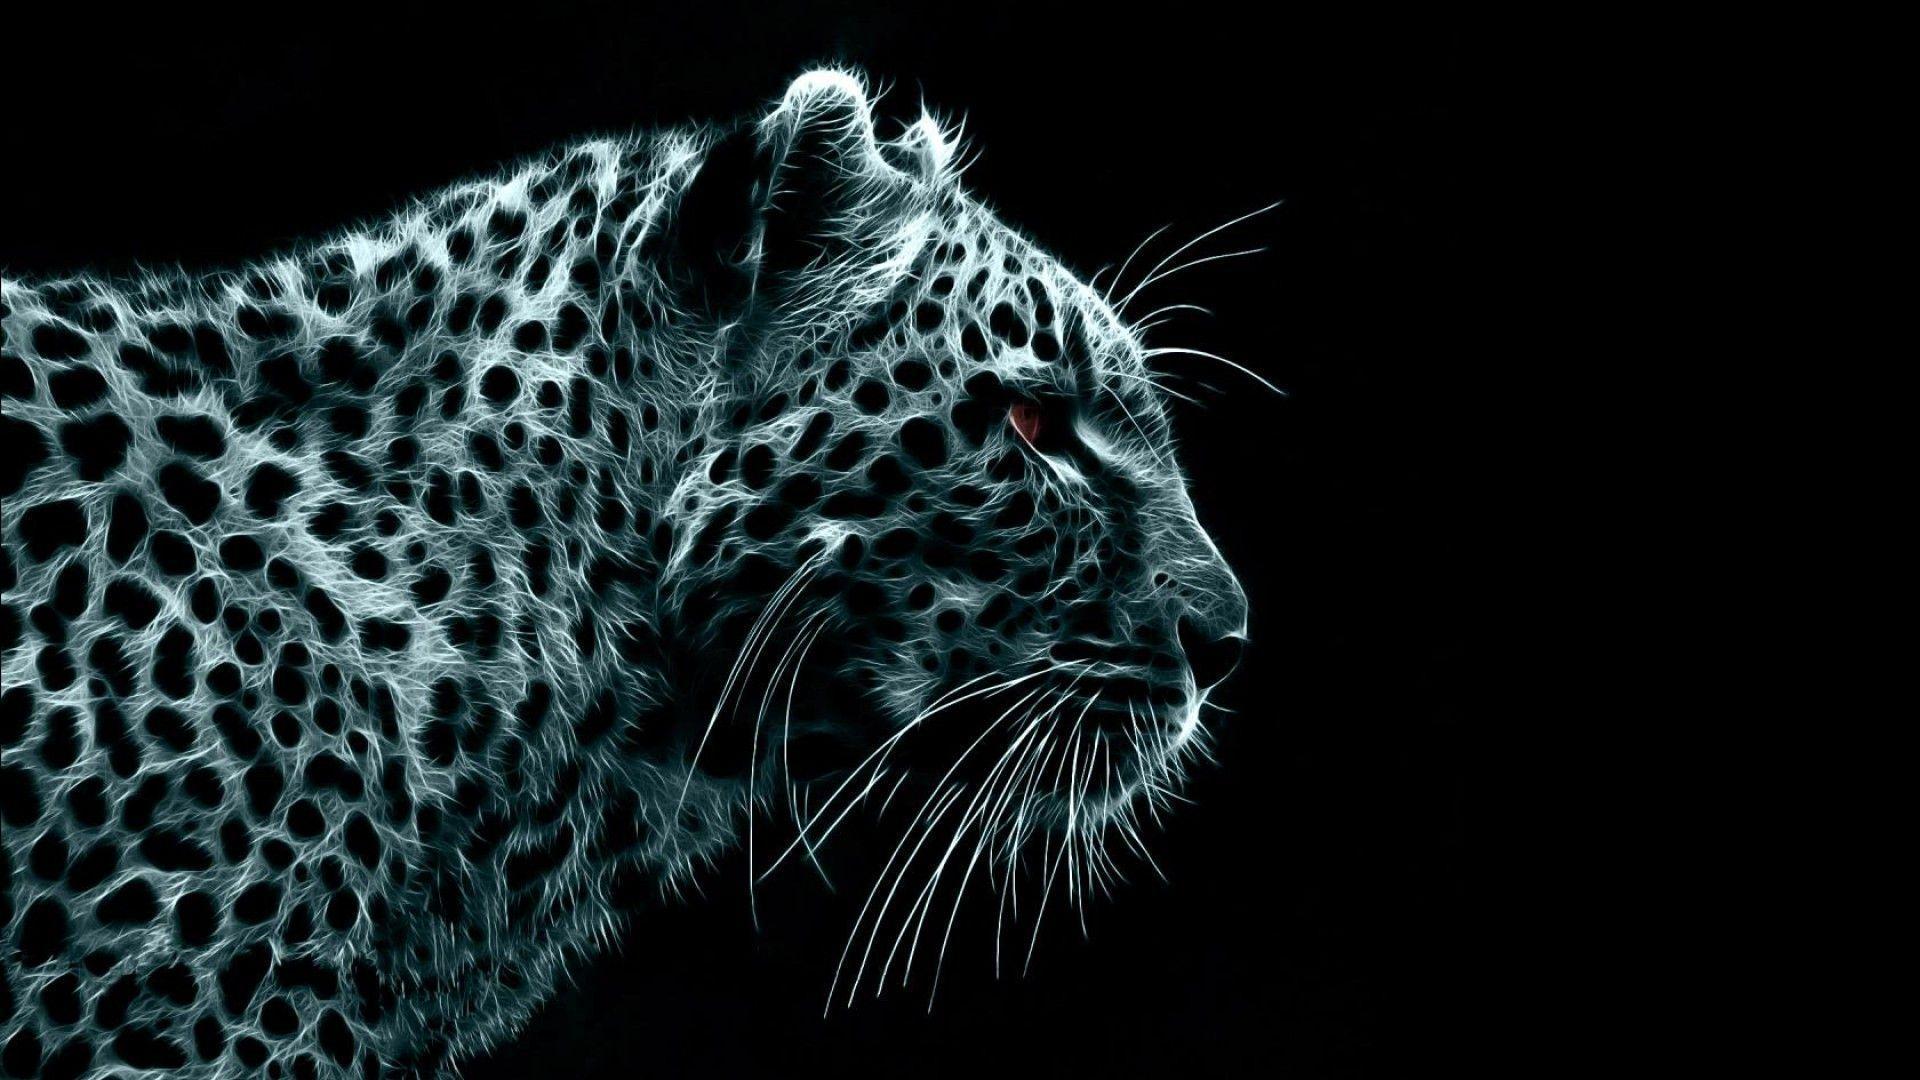 leopard dark wallpaper - Image And Wallpaper free to